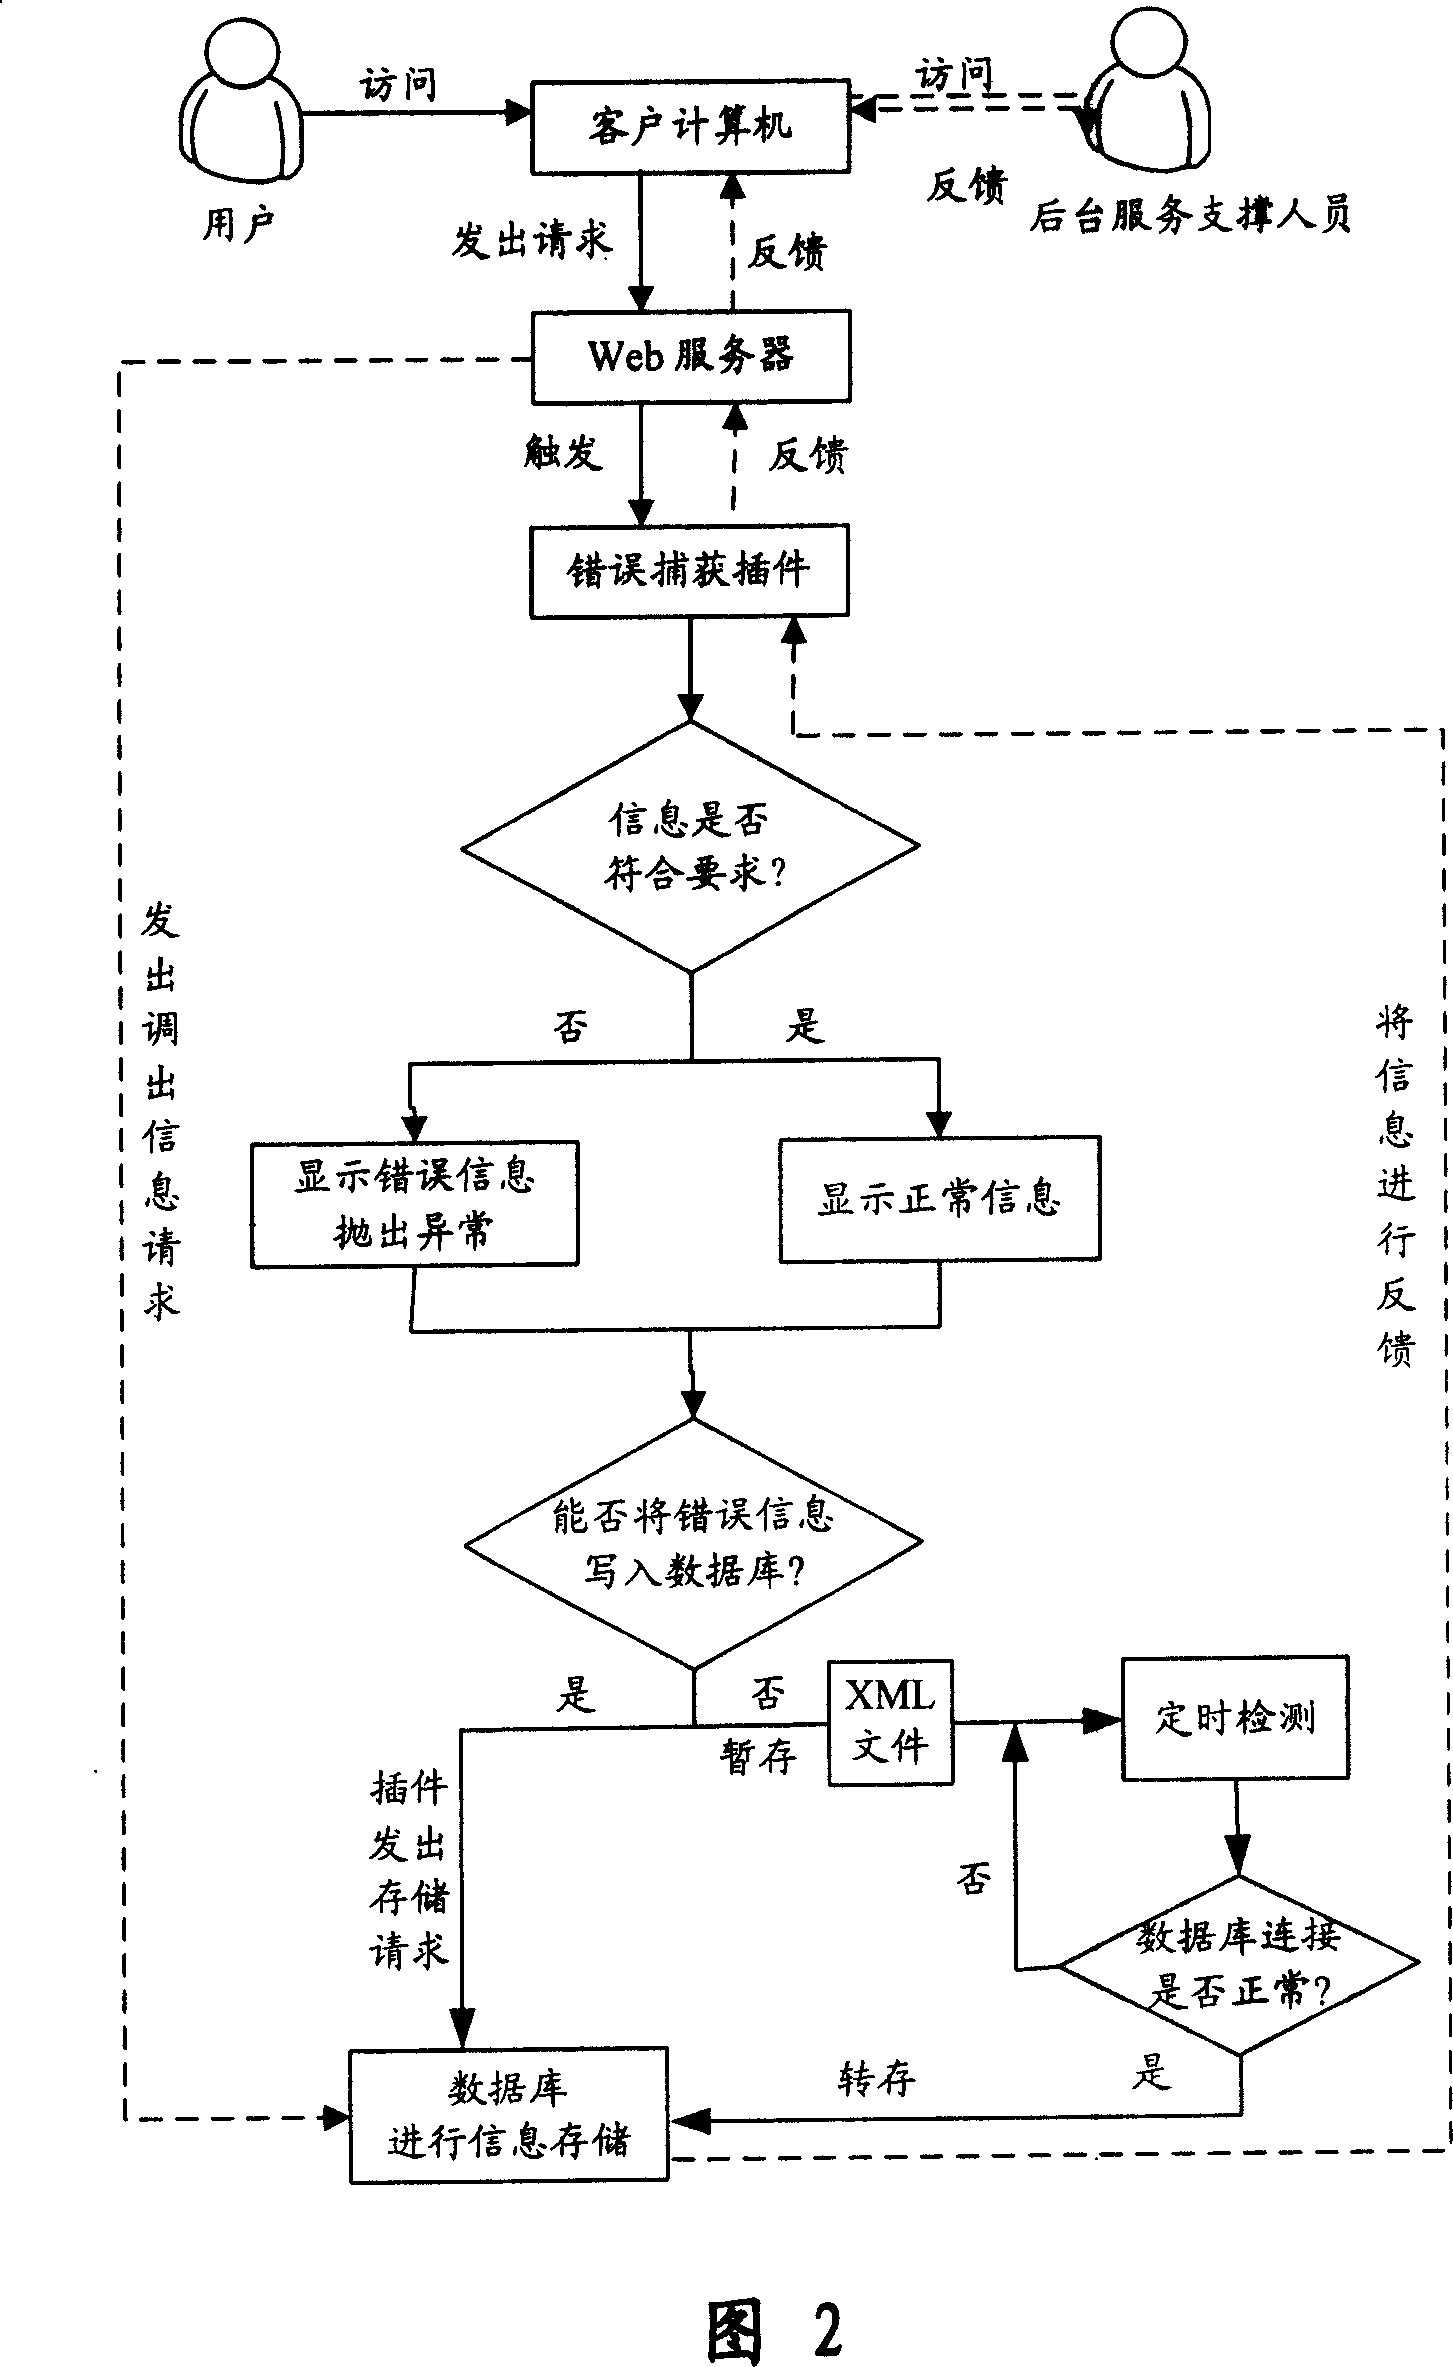 Error capturing plug-in used in information system and method of use thereof